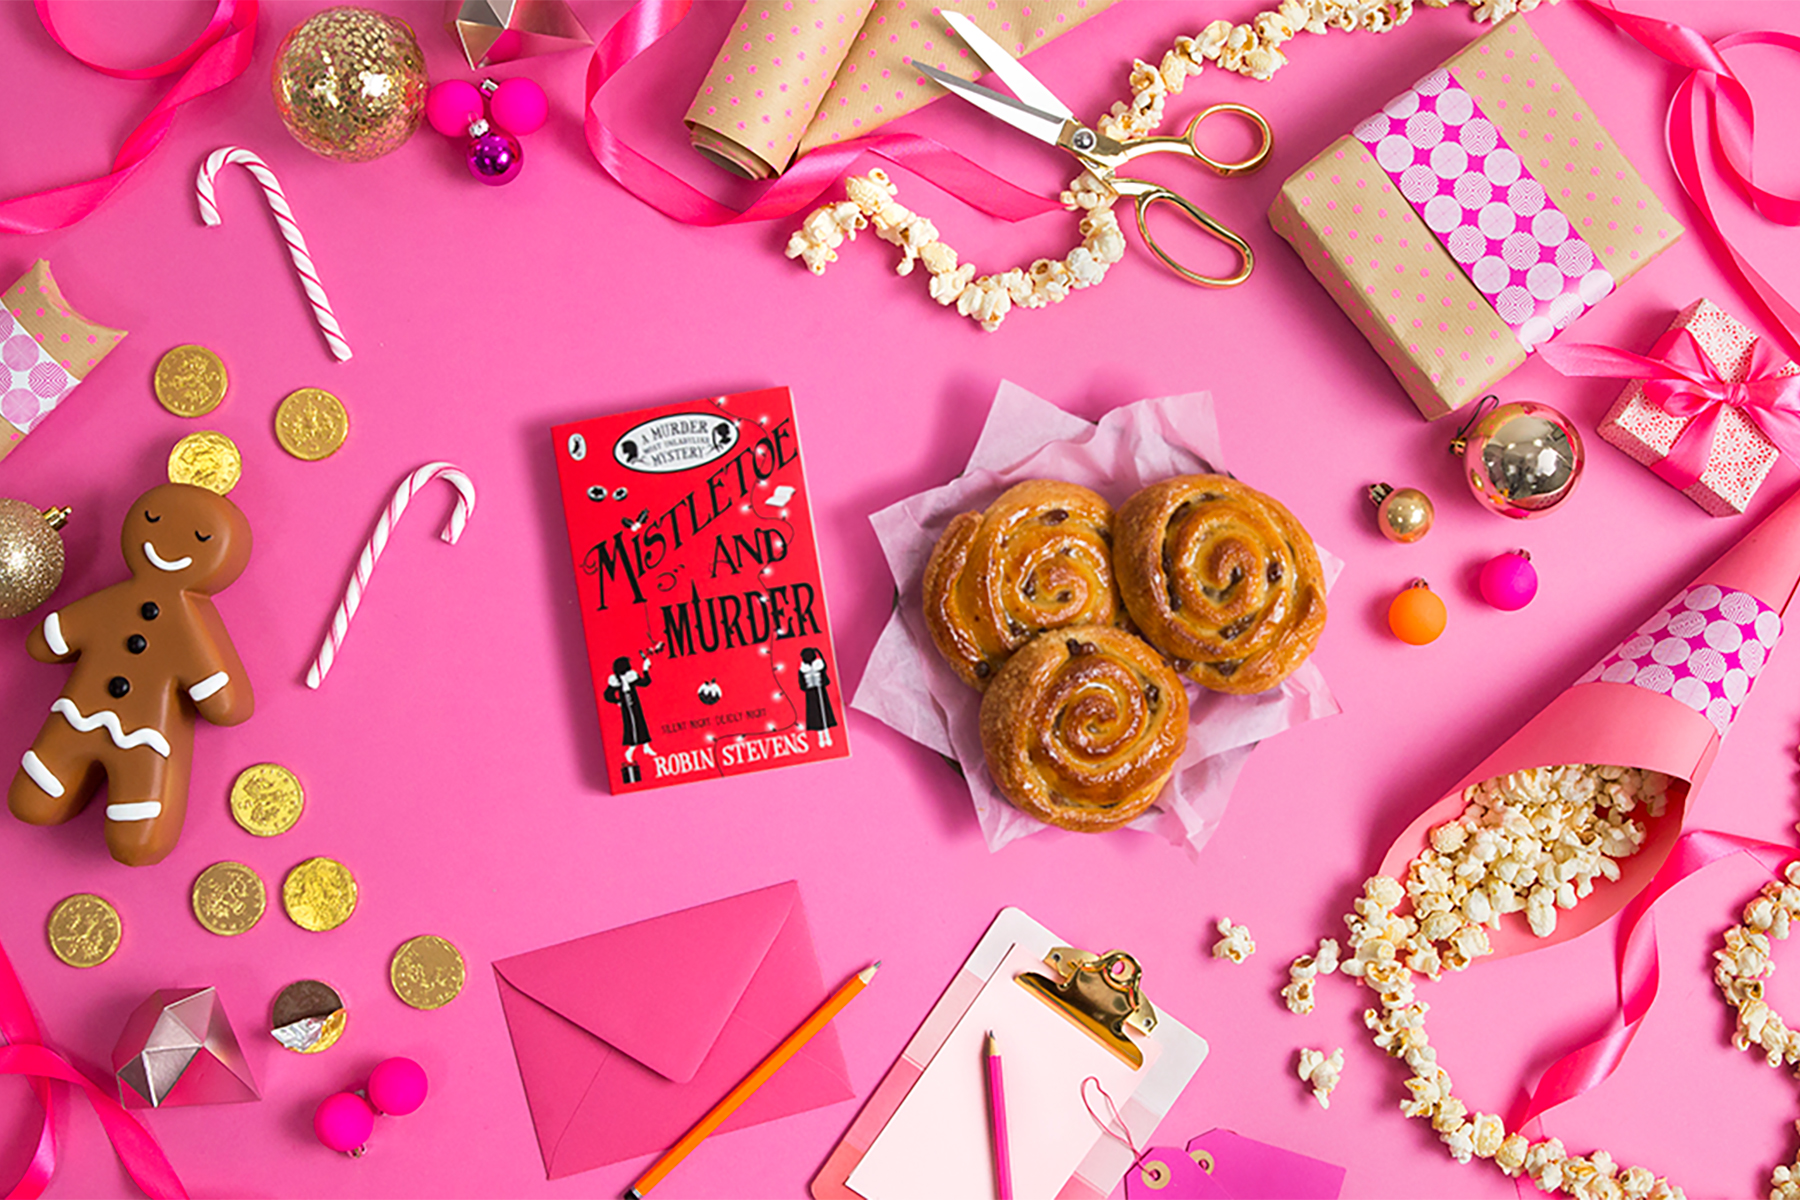 A photo of the book Mistletoe and Murder next to some Chelsea buns on a pink background surrounded by Christmas decorations